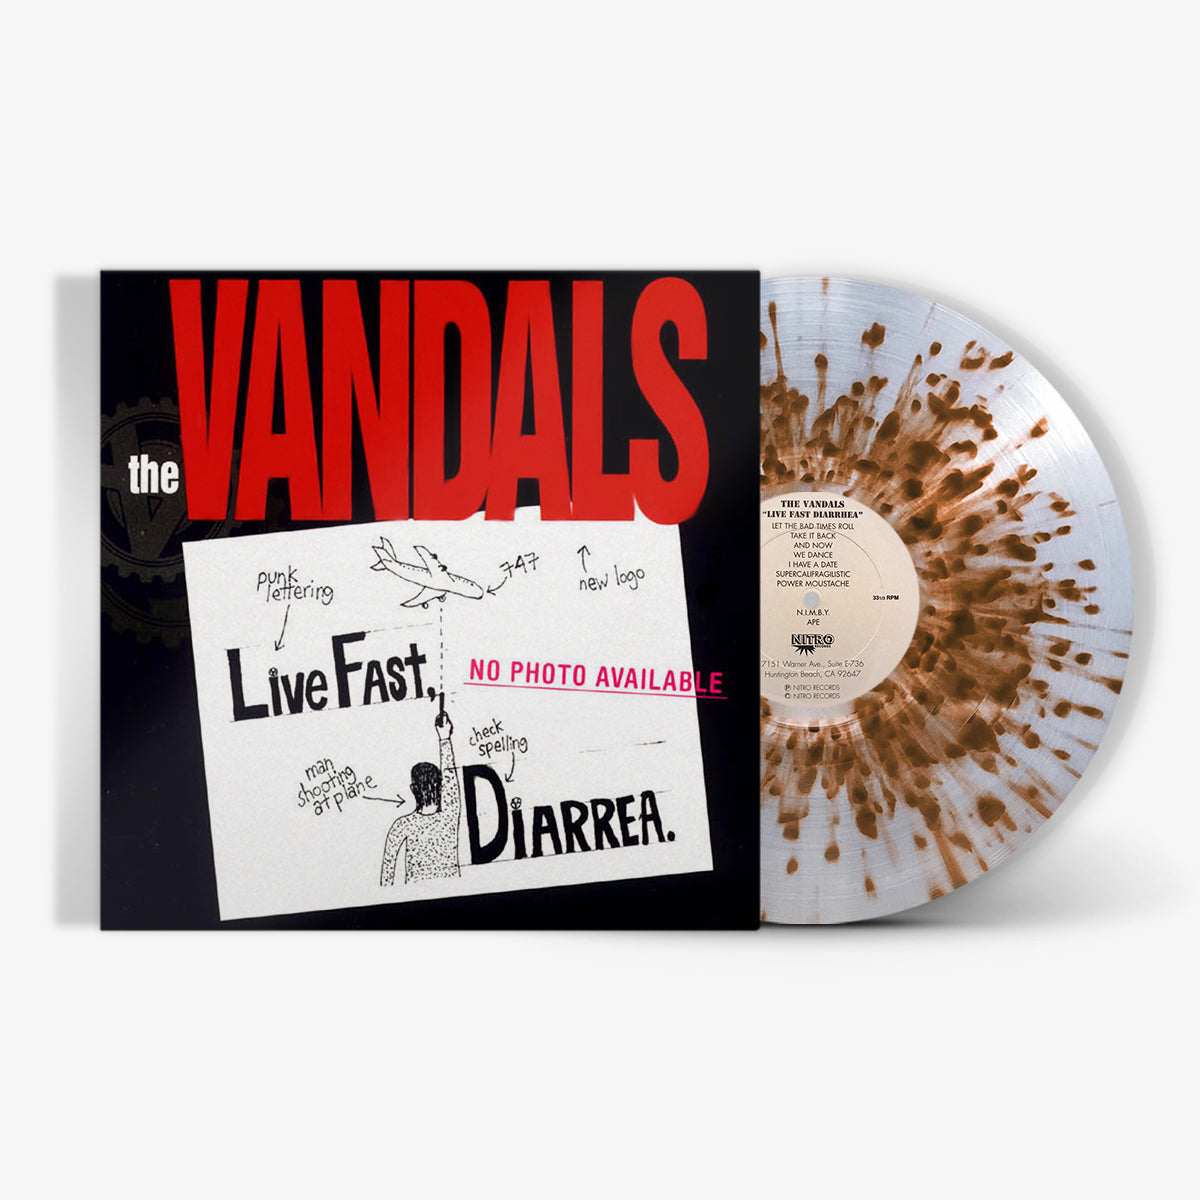 THE VANDALS - Live Fast Diarrhea (25th Anniversary Edition) - LP - Limited Explosive Brown Splatter